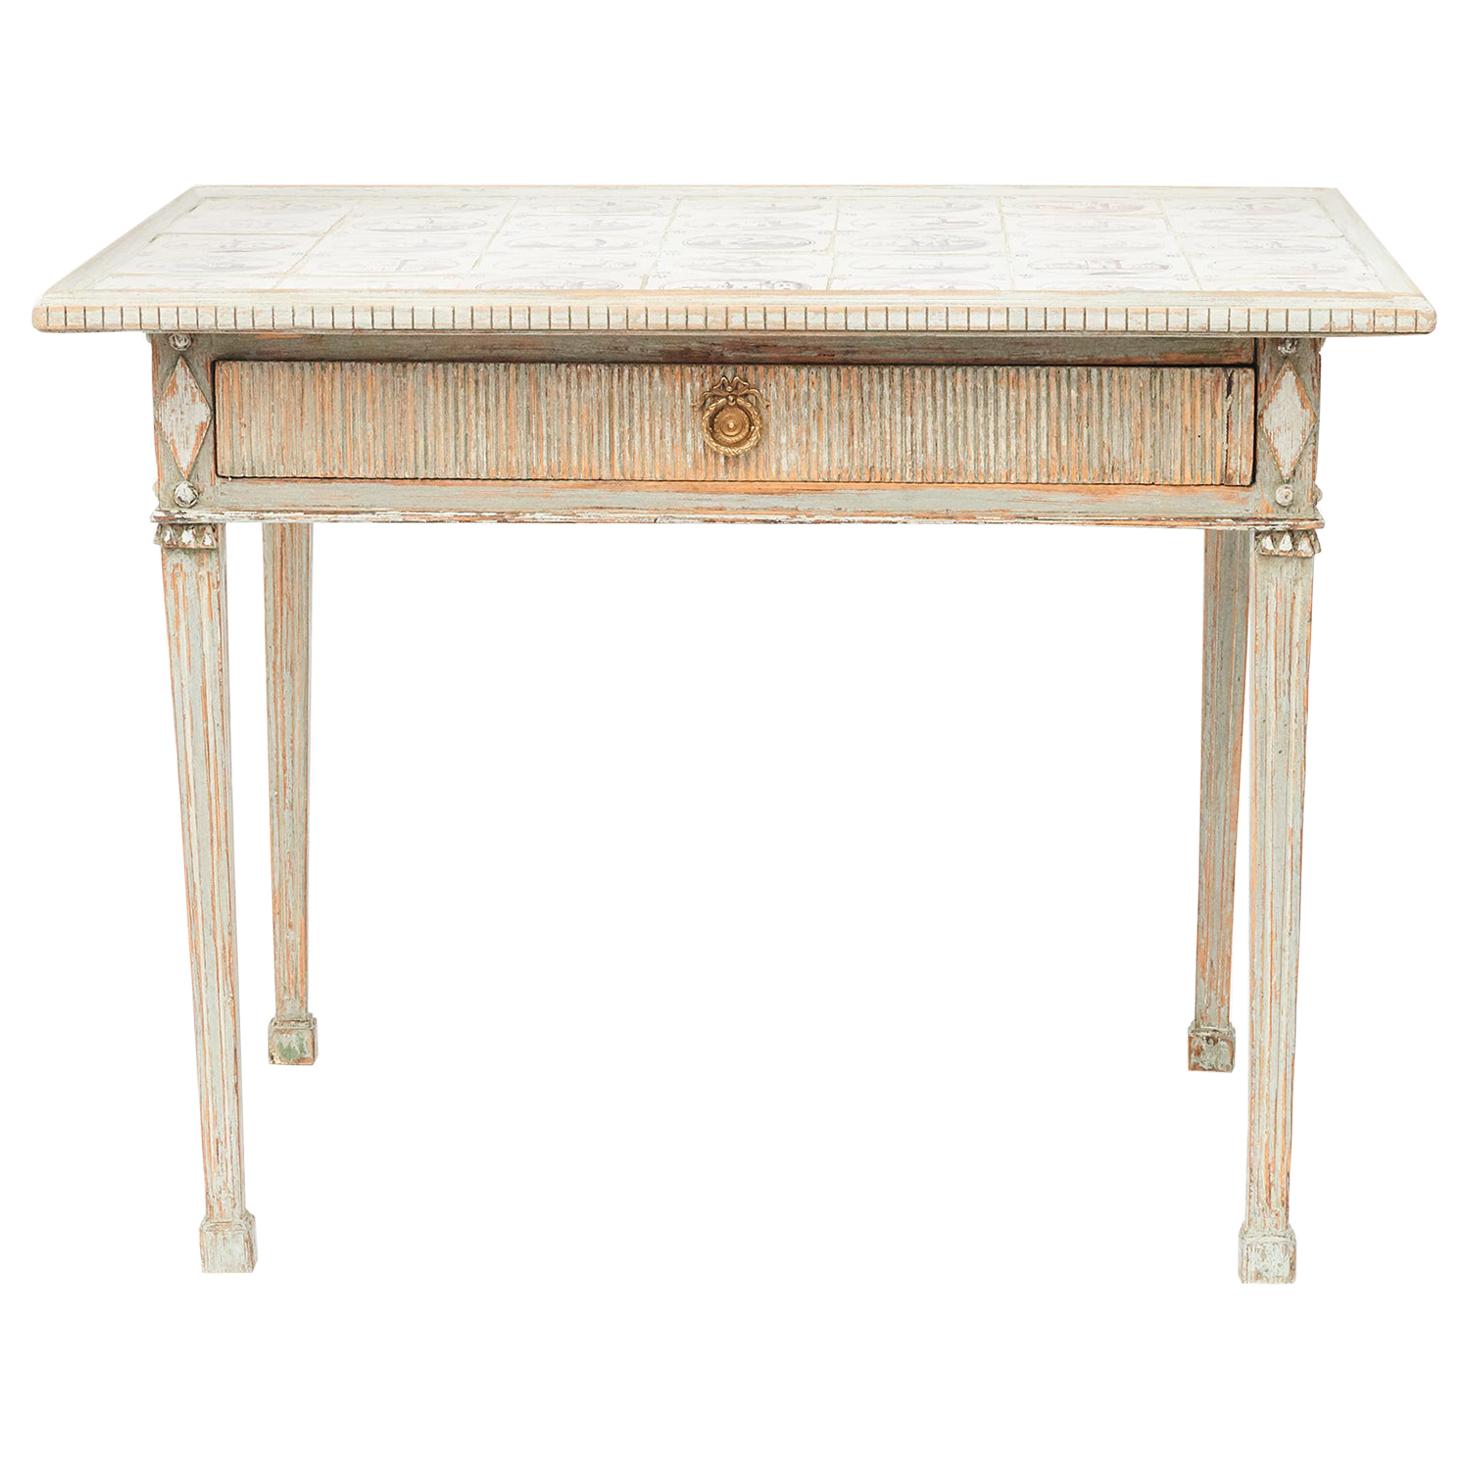 Late 18th Century Danish Louis XVI Table with Dutch Decorated Tiles